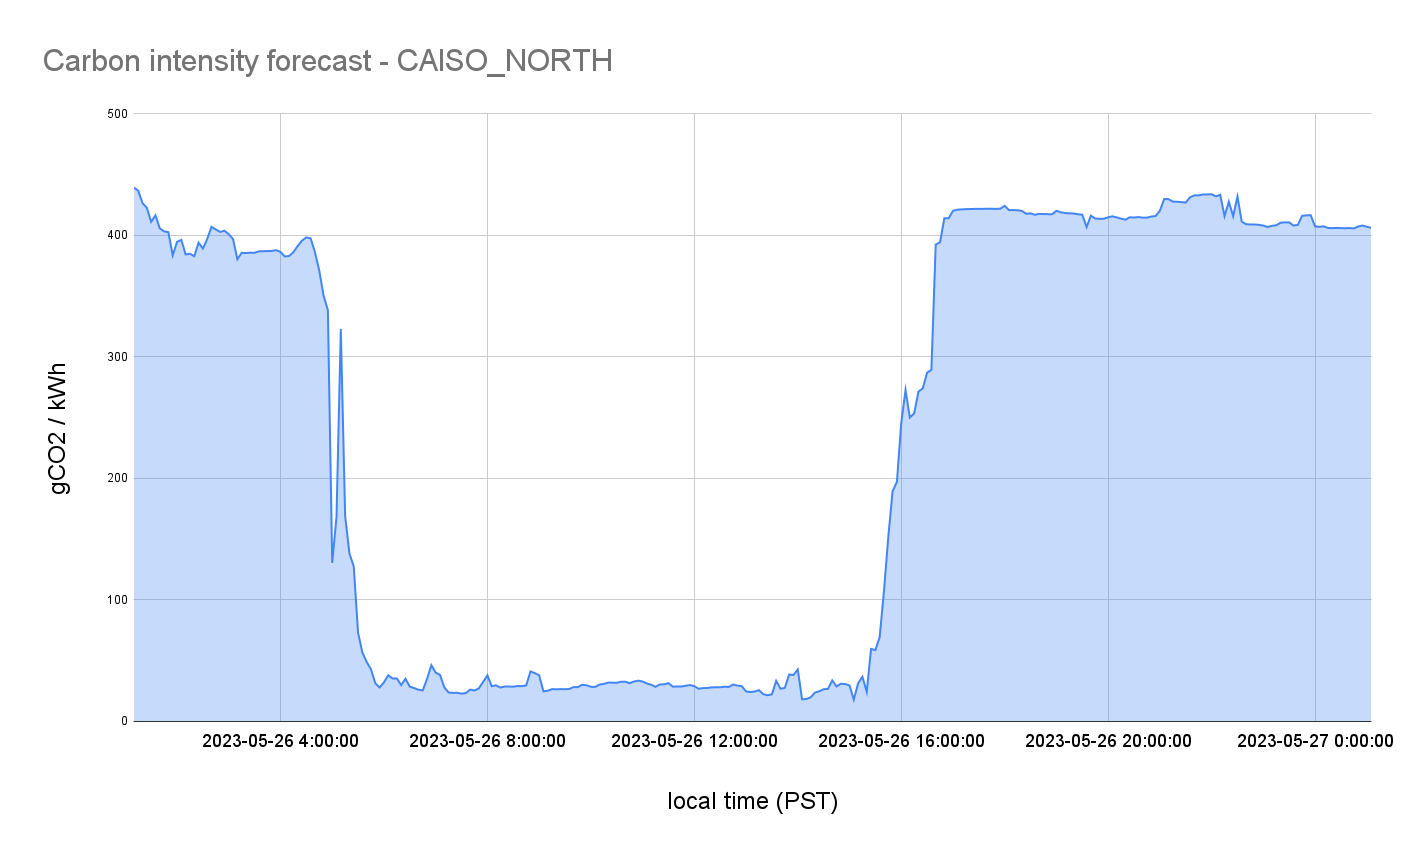 Carbon intensity forecast for CAISO_NORTH grid region